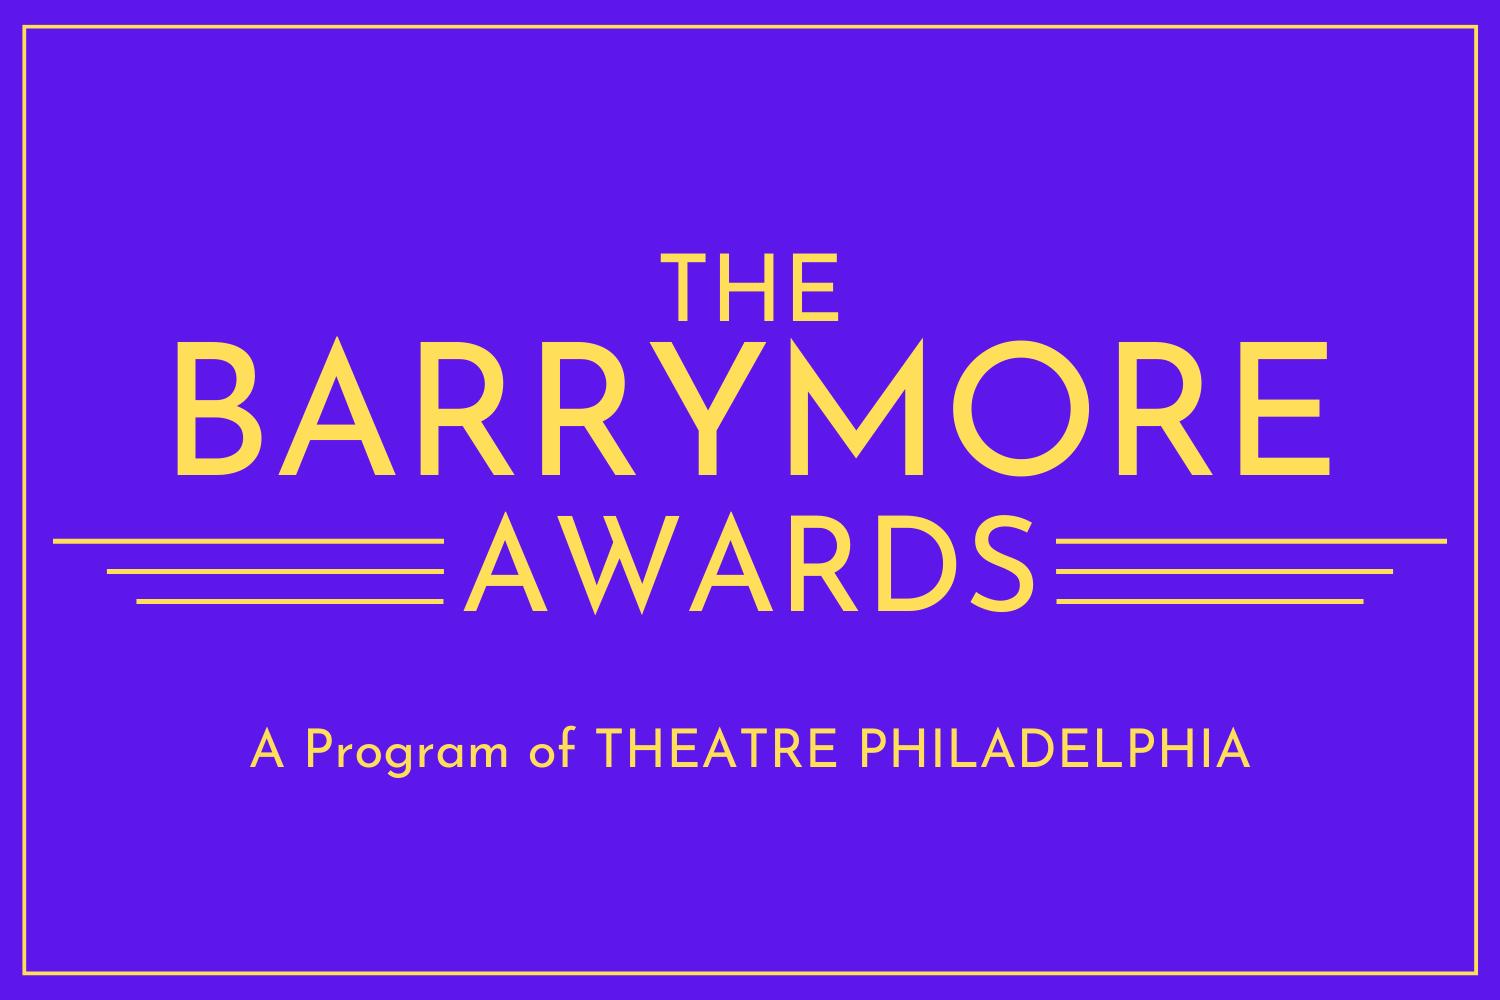 Purple background with The Barrymore Awards in yellow lettering